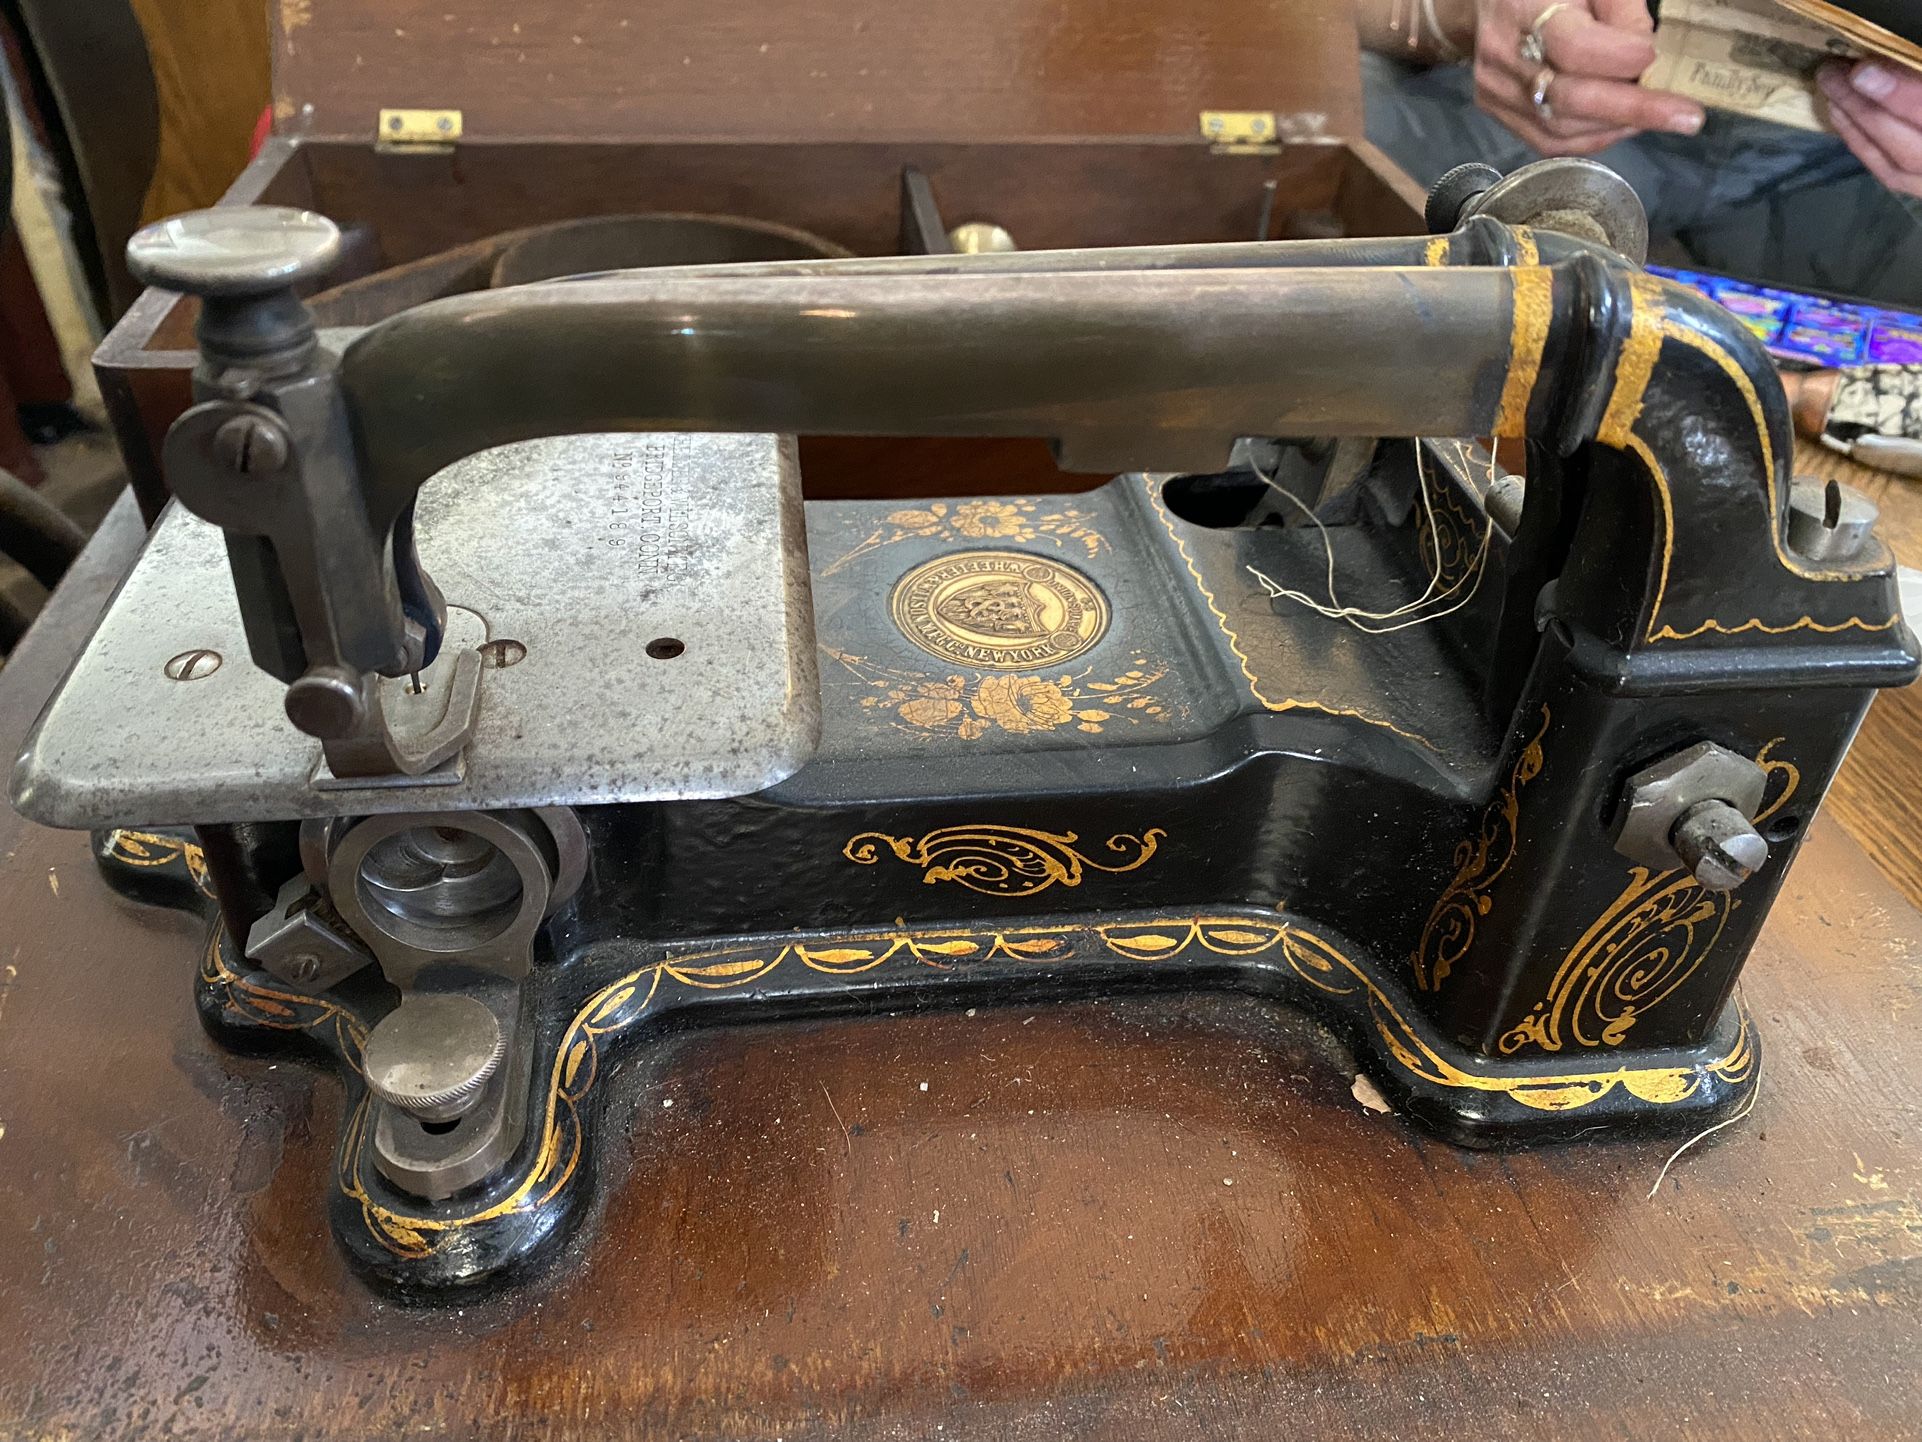 Wheeler And Wilson Band Driven Sewing Machine